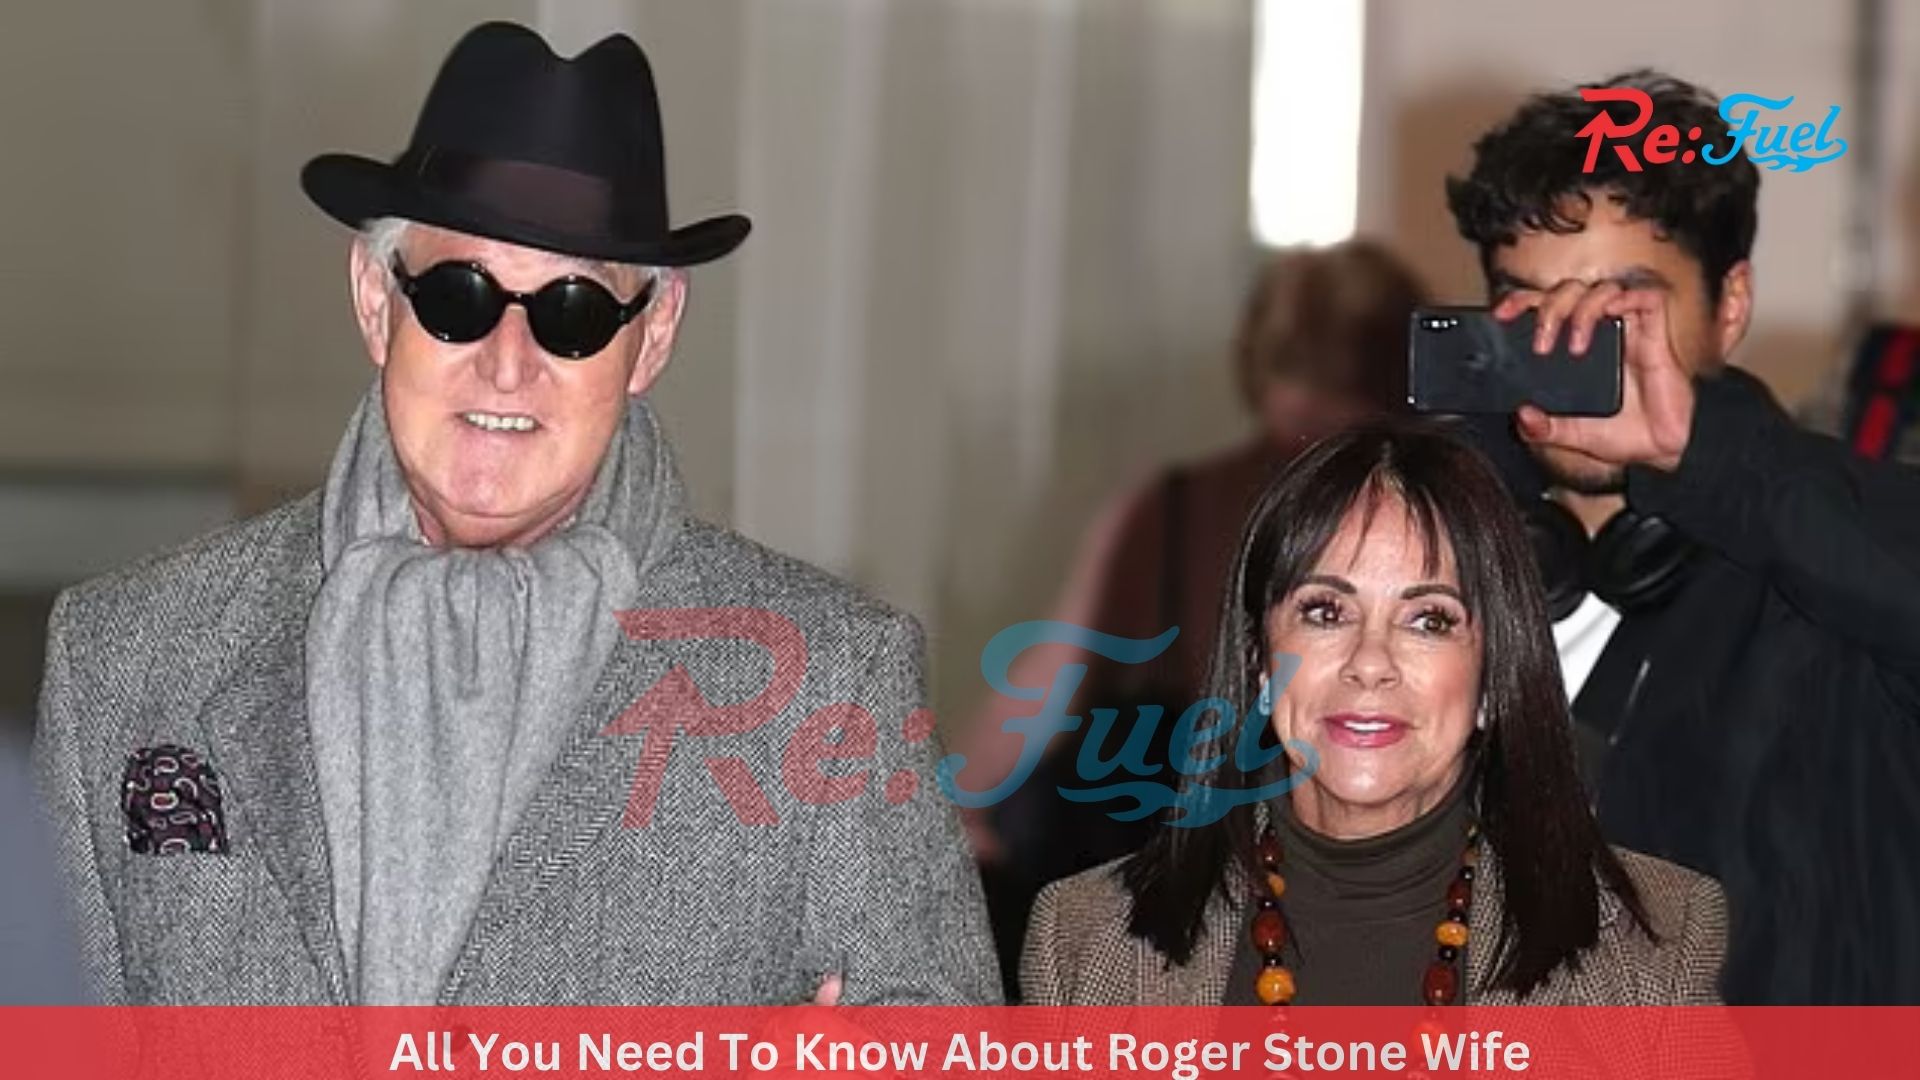 All You Need To Know About Roger Stone Wife